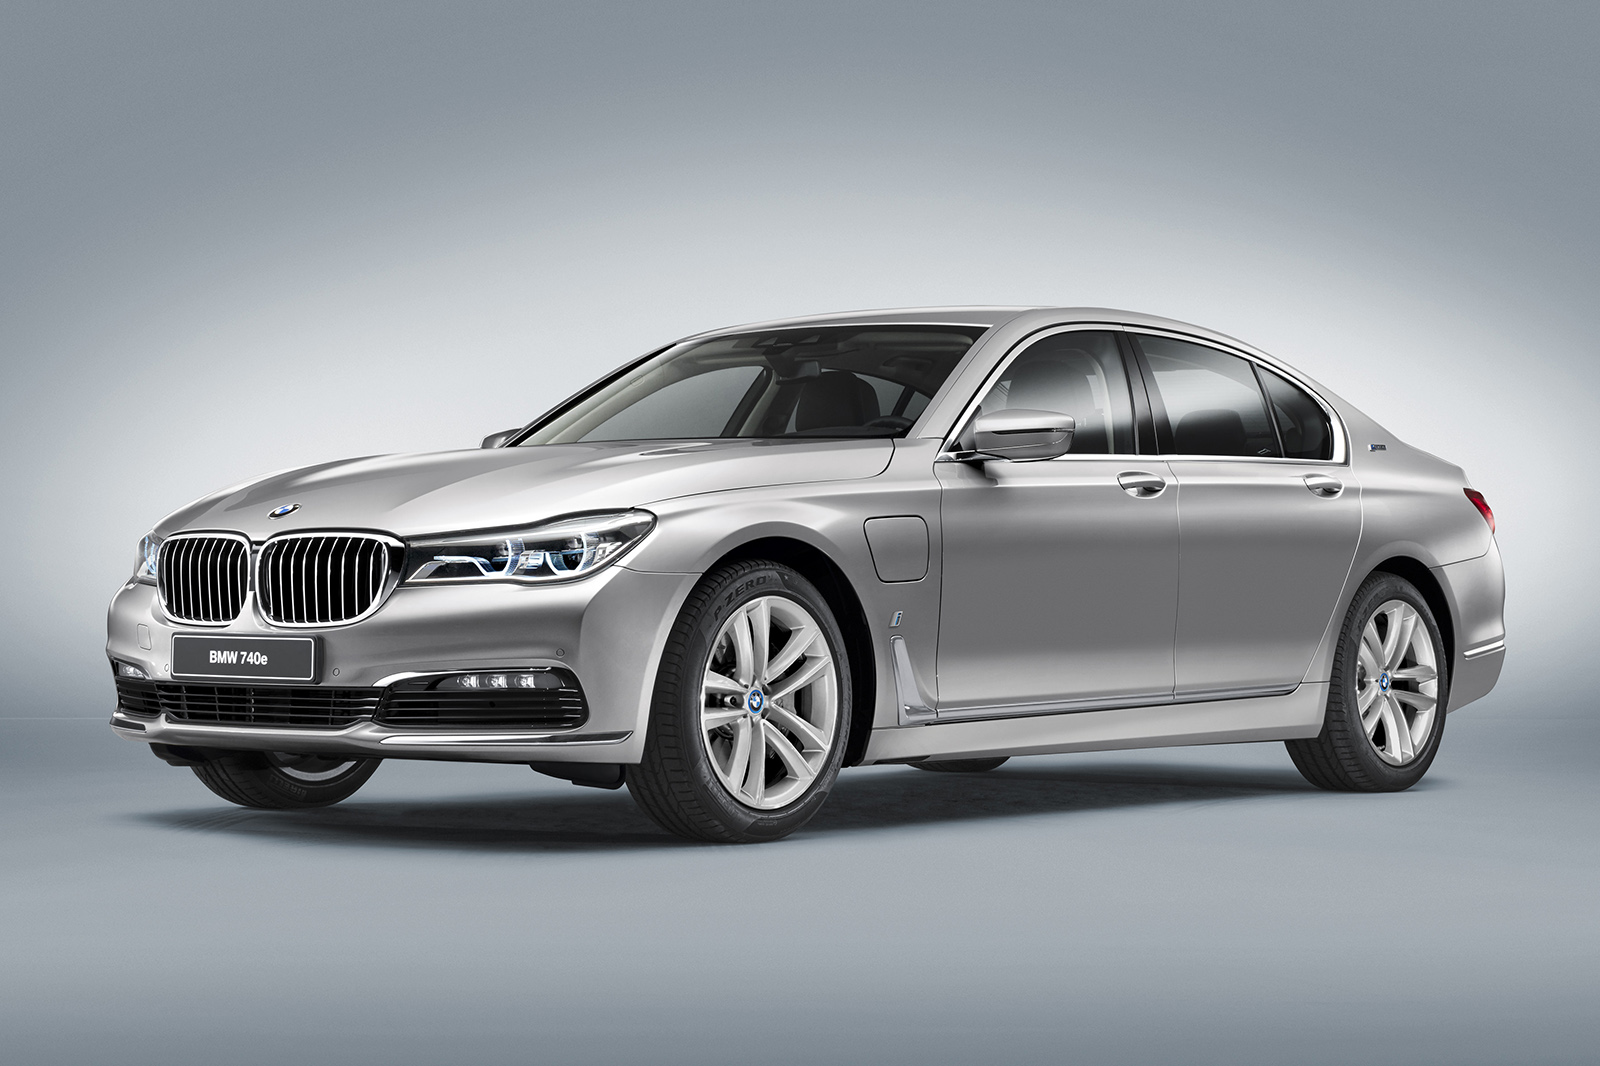 BMW 7 Series 740e iPerformance - prices and specs revealed | Autocar